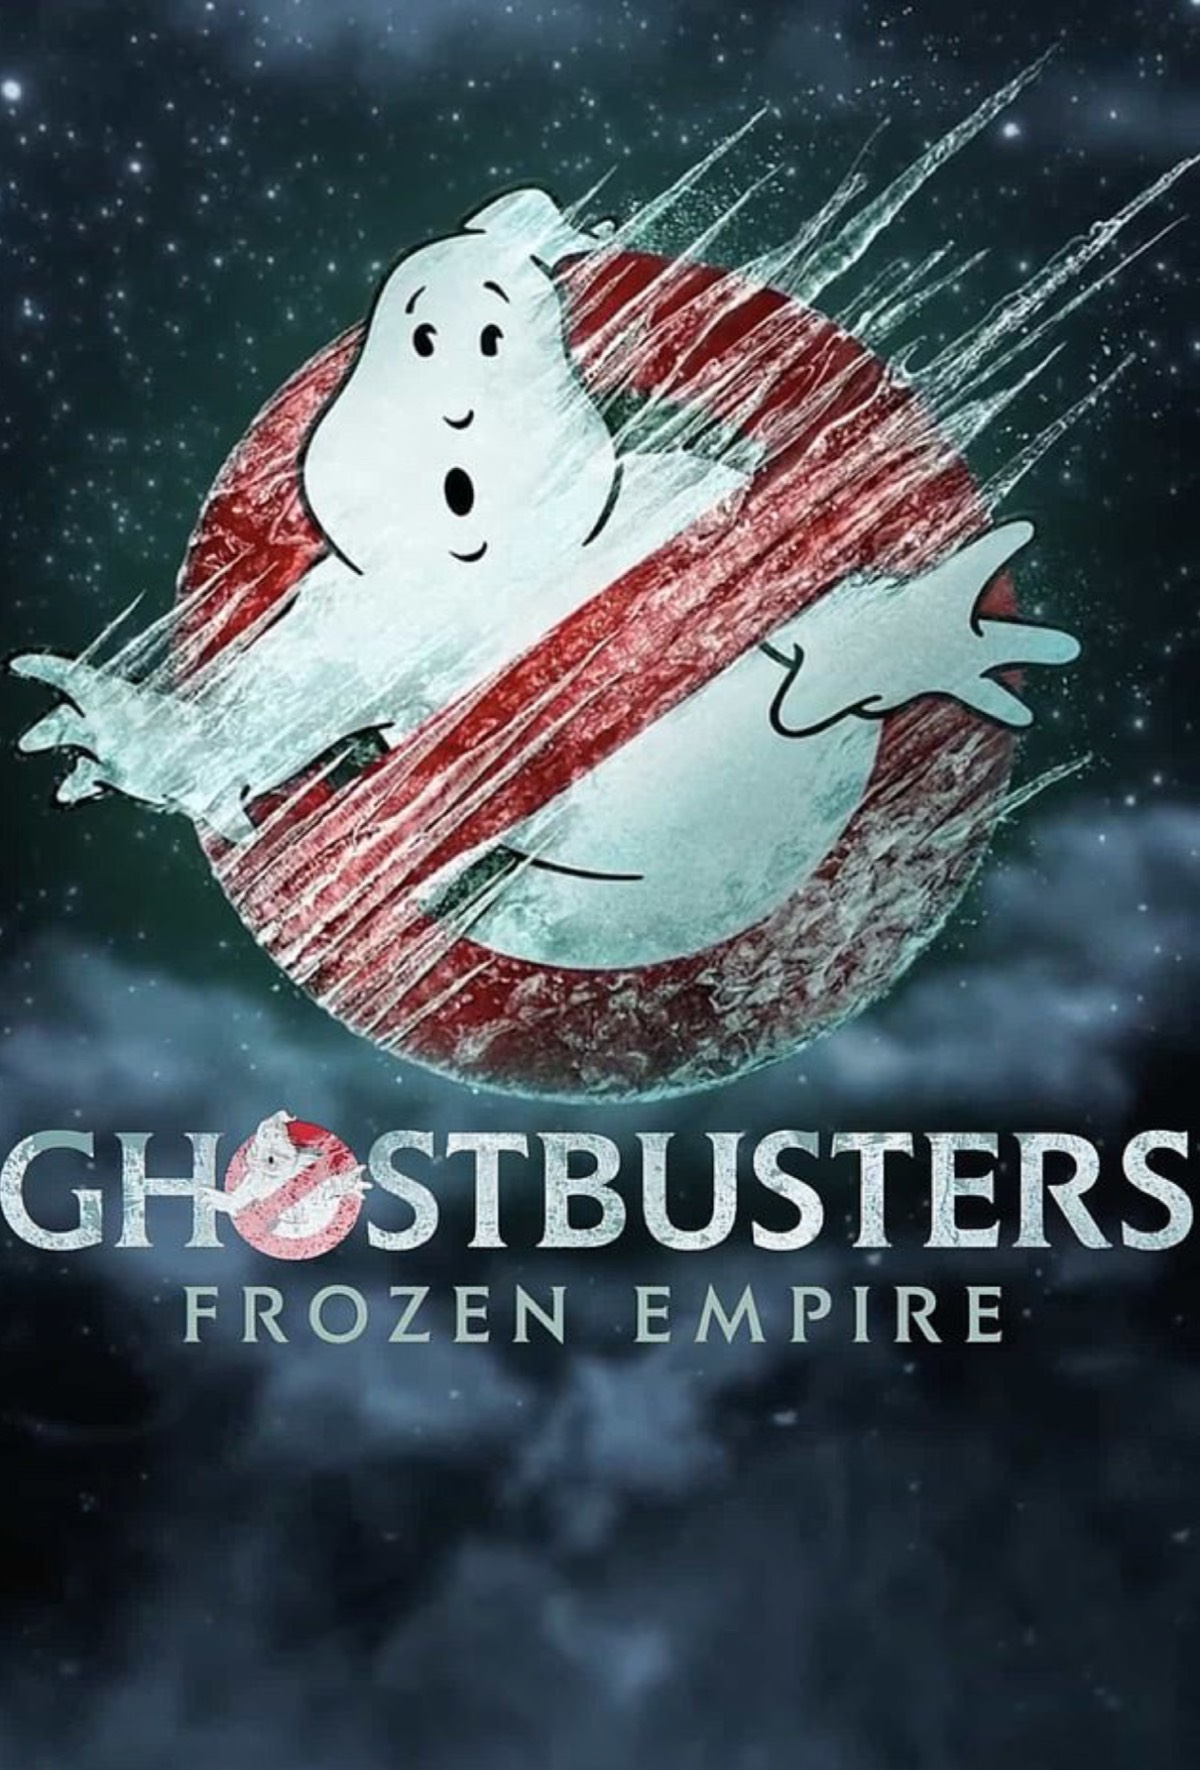 New York falls under a spectral “death chill” in Ghostbusters: Frozen  Empire teaser